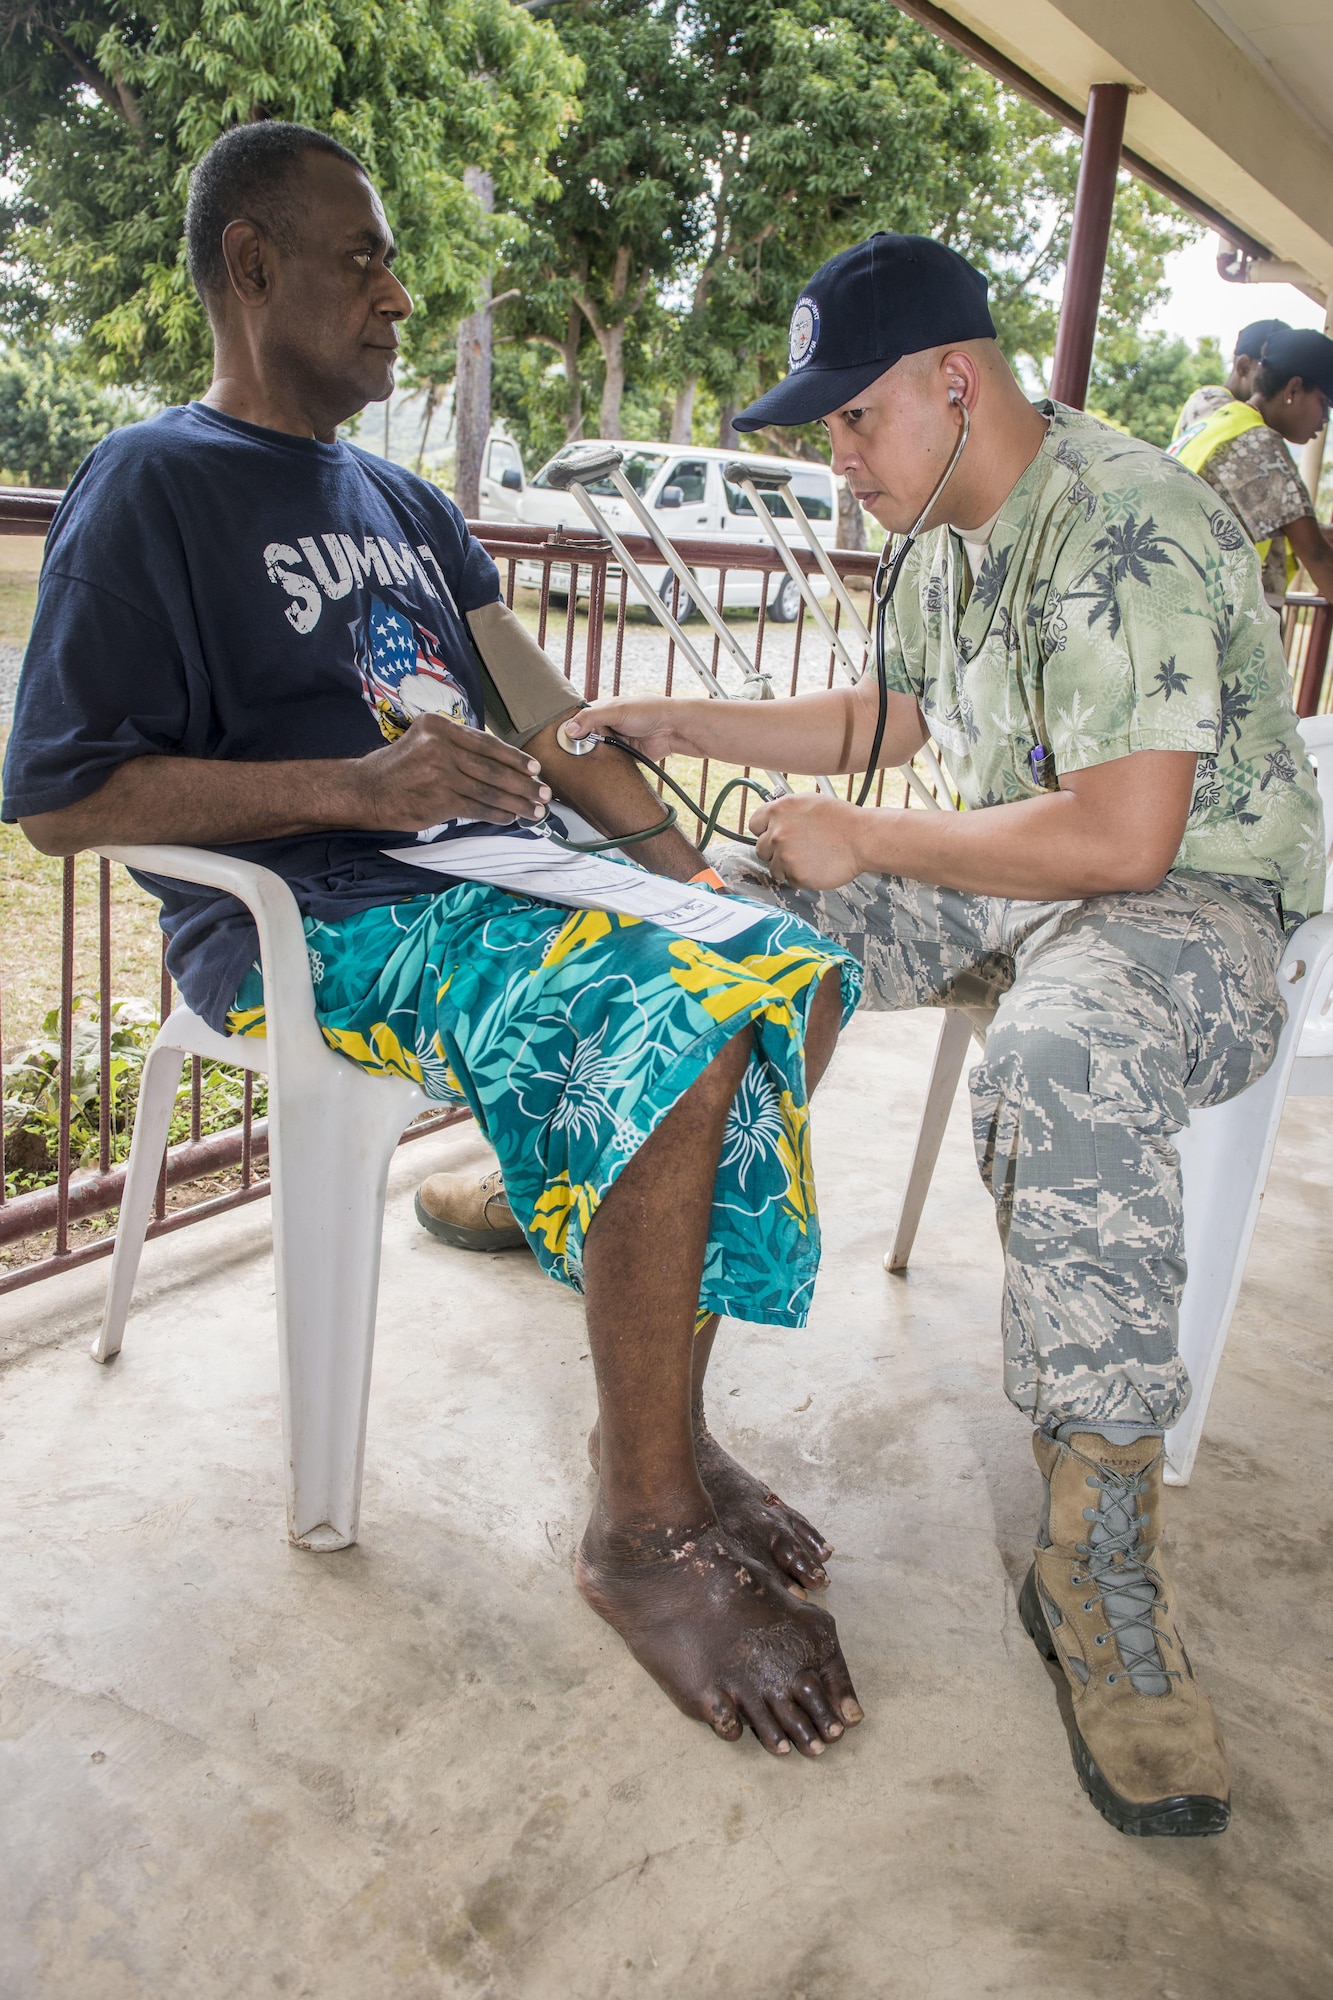 U.S. Air Force Tech. Sgt. Michael Ang, an aerospace medical services craftsman with the 18th Medical Operations Squadron at Kadena Air Base, Japan, evaluates a patient’s arthritis ridden foot while taking his vitals before sending to a specialist during Pacific Angel (PACANGEL) 17-3 at the Tagitagi Sangam School and Kindergarten in Tavua, Fiji, July 17, 2017. PACANGEL 17-3 built partnerships between the U.S., Fiji, and five regional nations including Australia, Vanuatu, Indonesia, the Philippines and France by conducting multilateral humanitarian assistance and civil military operations, promoting regional military-civilian-nongovernmental organization cooperation and interoperability. (U.S. Air Force photo/Tech. Sgt. Benjamin W. Stratton)